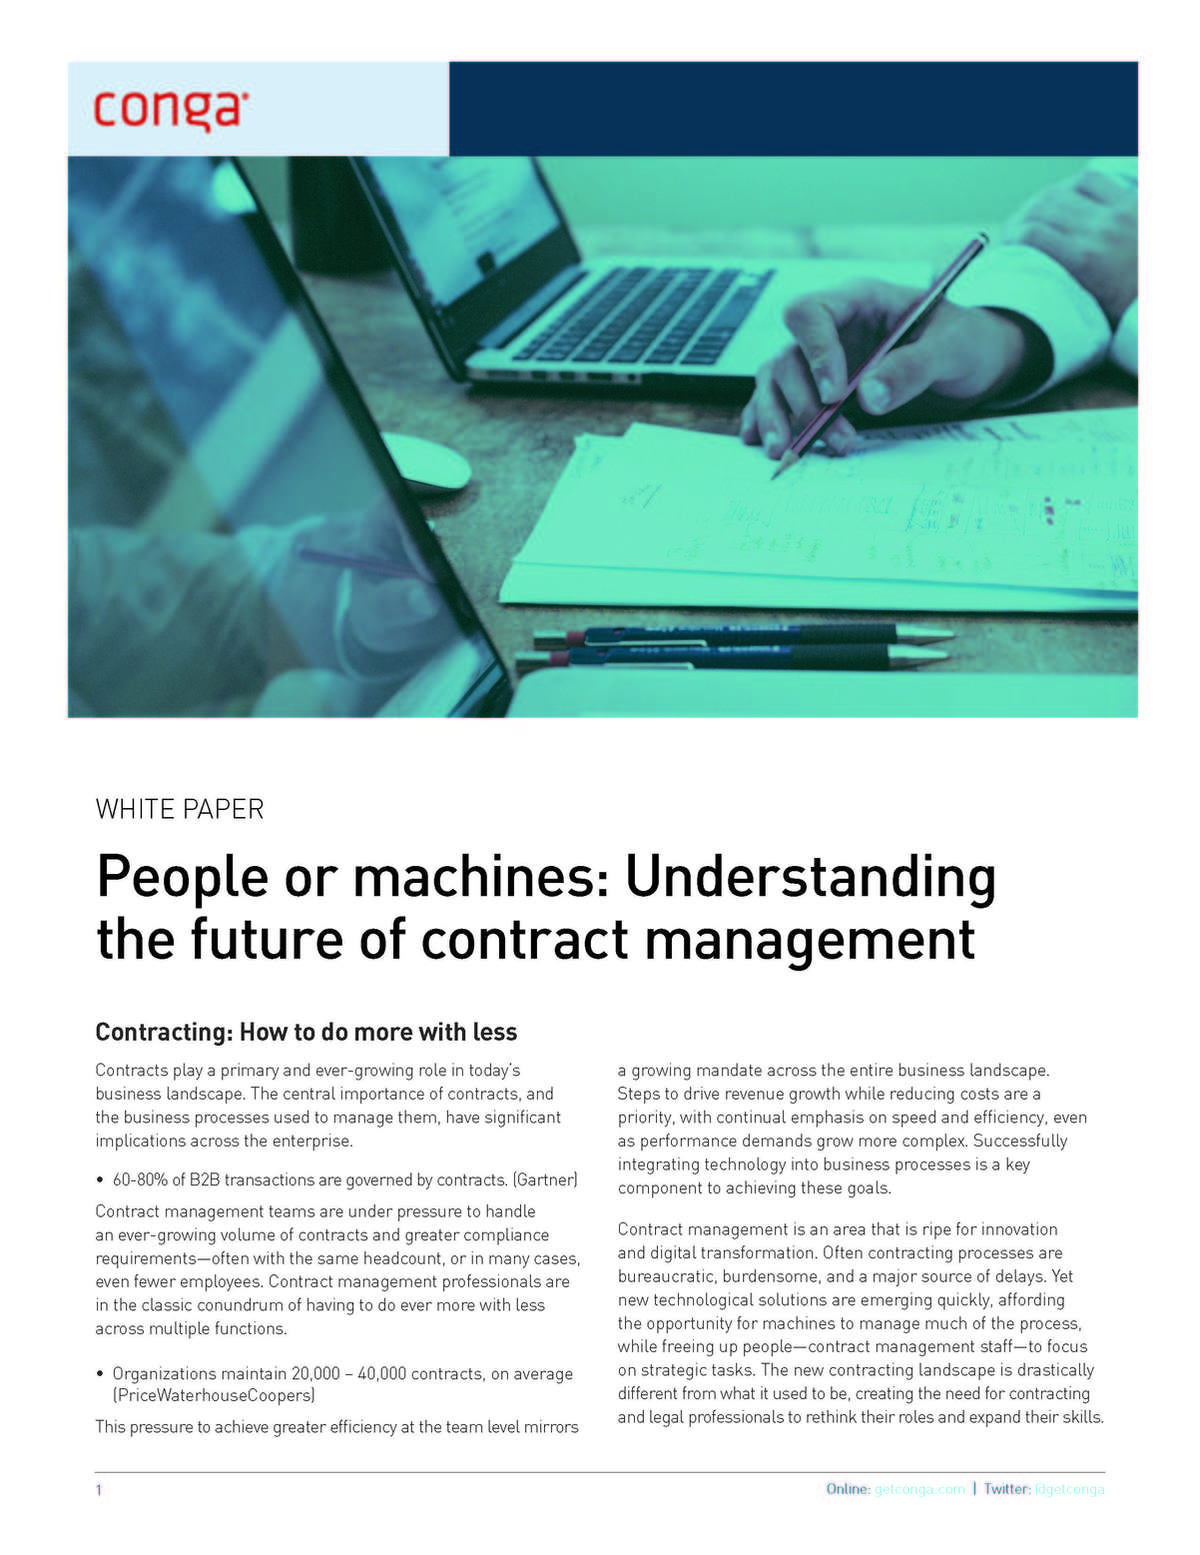 People or Machines: The Future of Contract Management